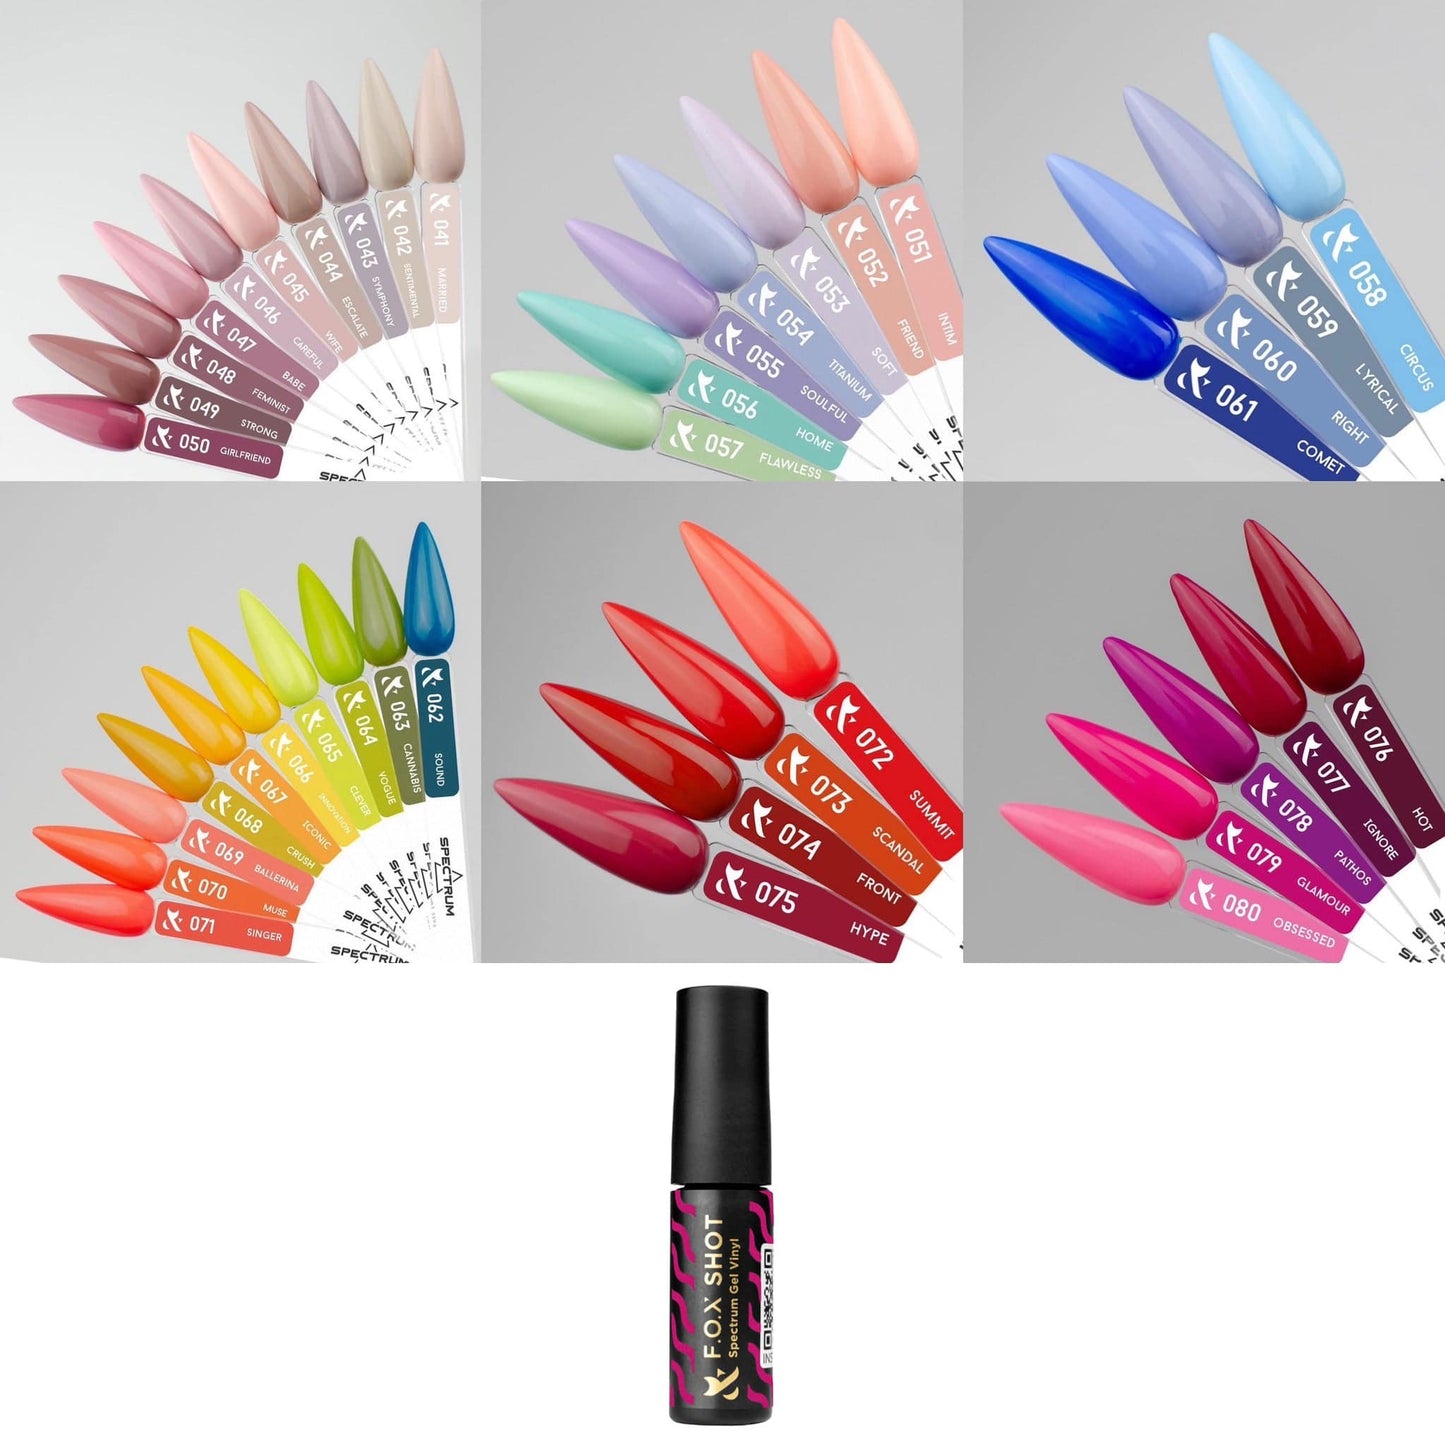 F.O.X Spectrum Full Collection bundle (bulk offer) set + swatches - F.O.X Nails USA